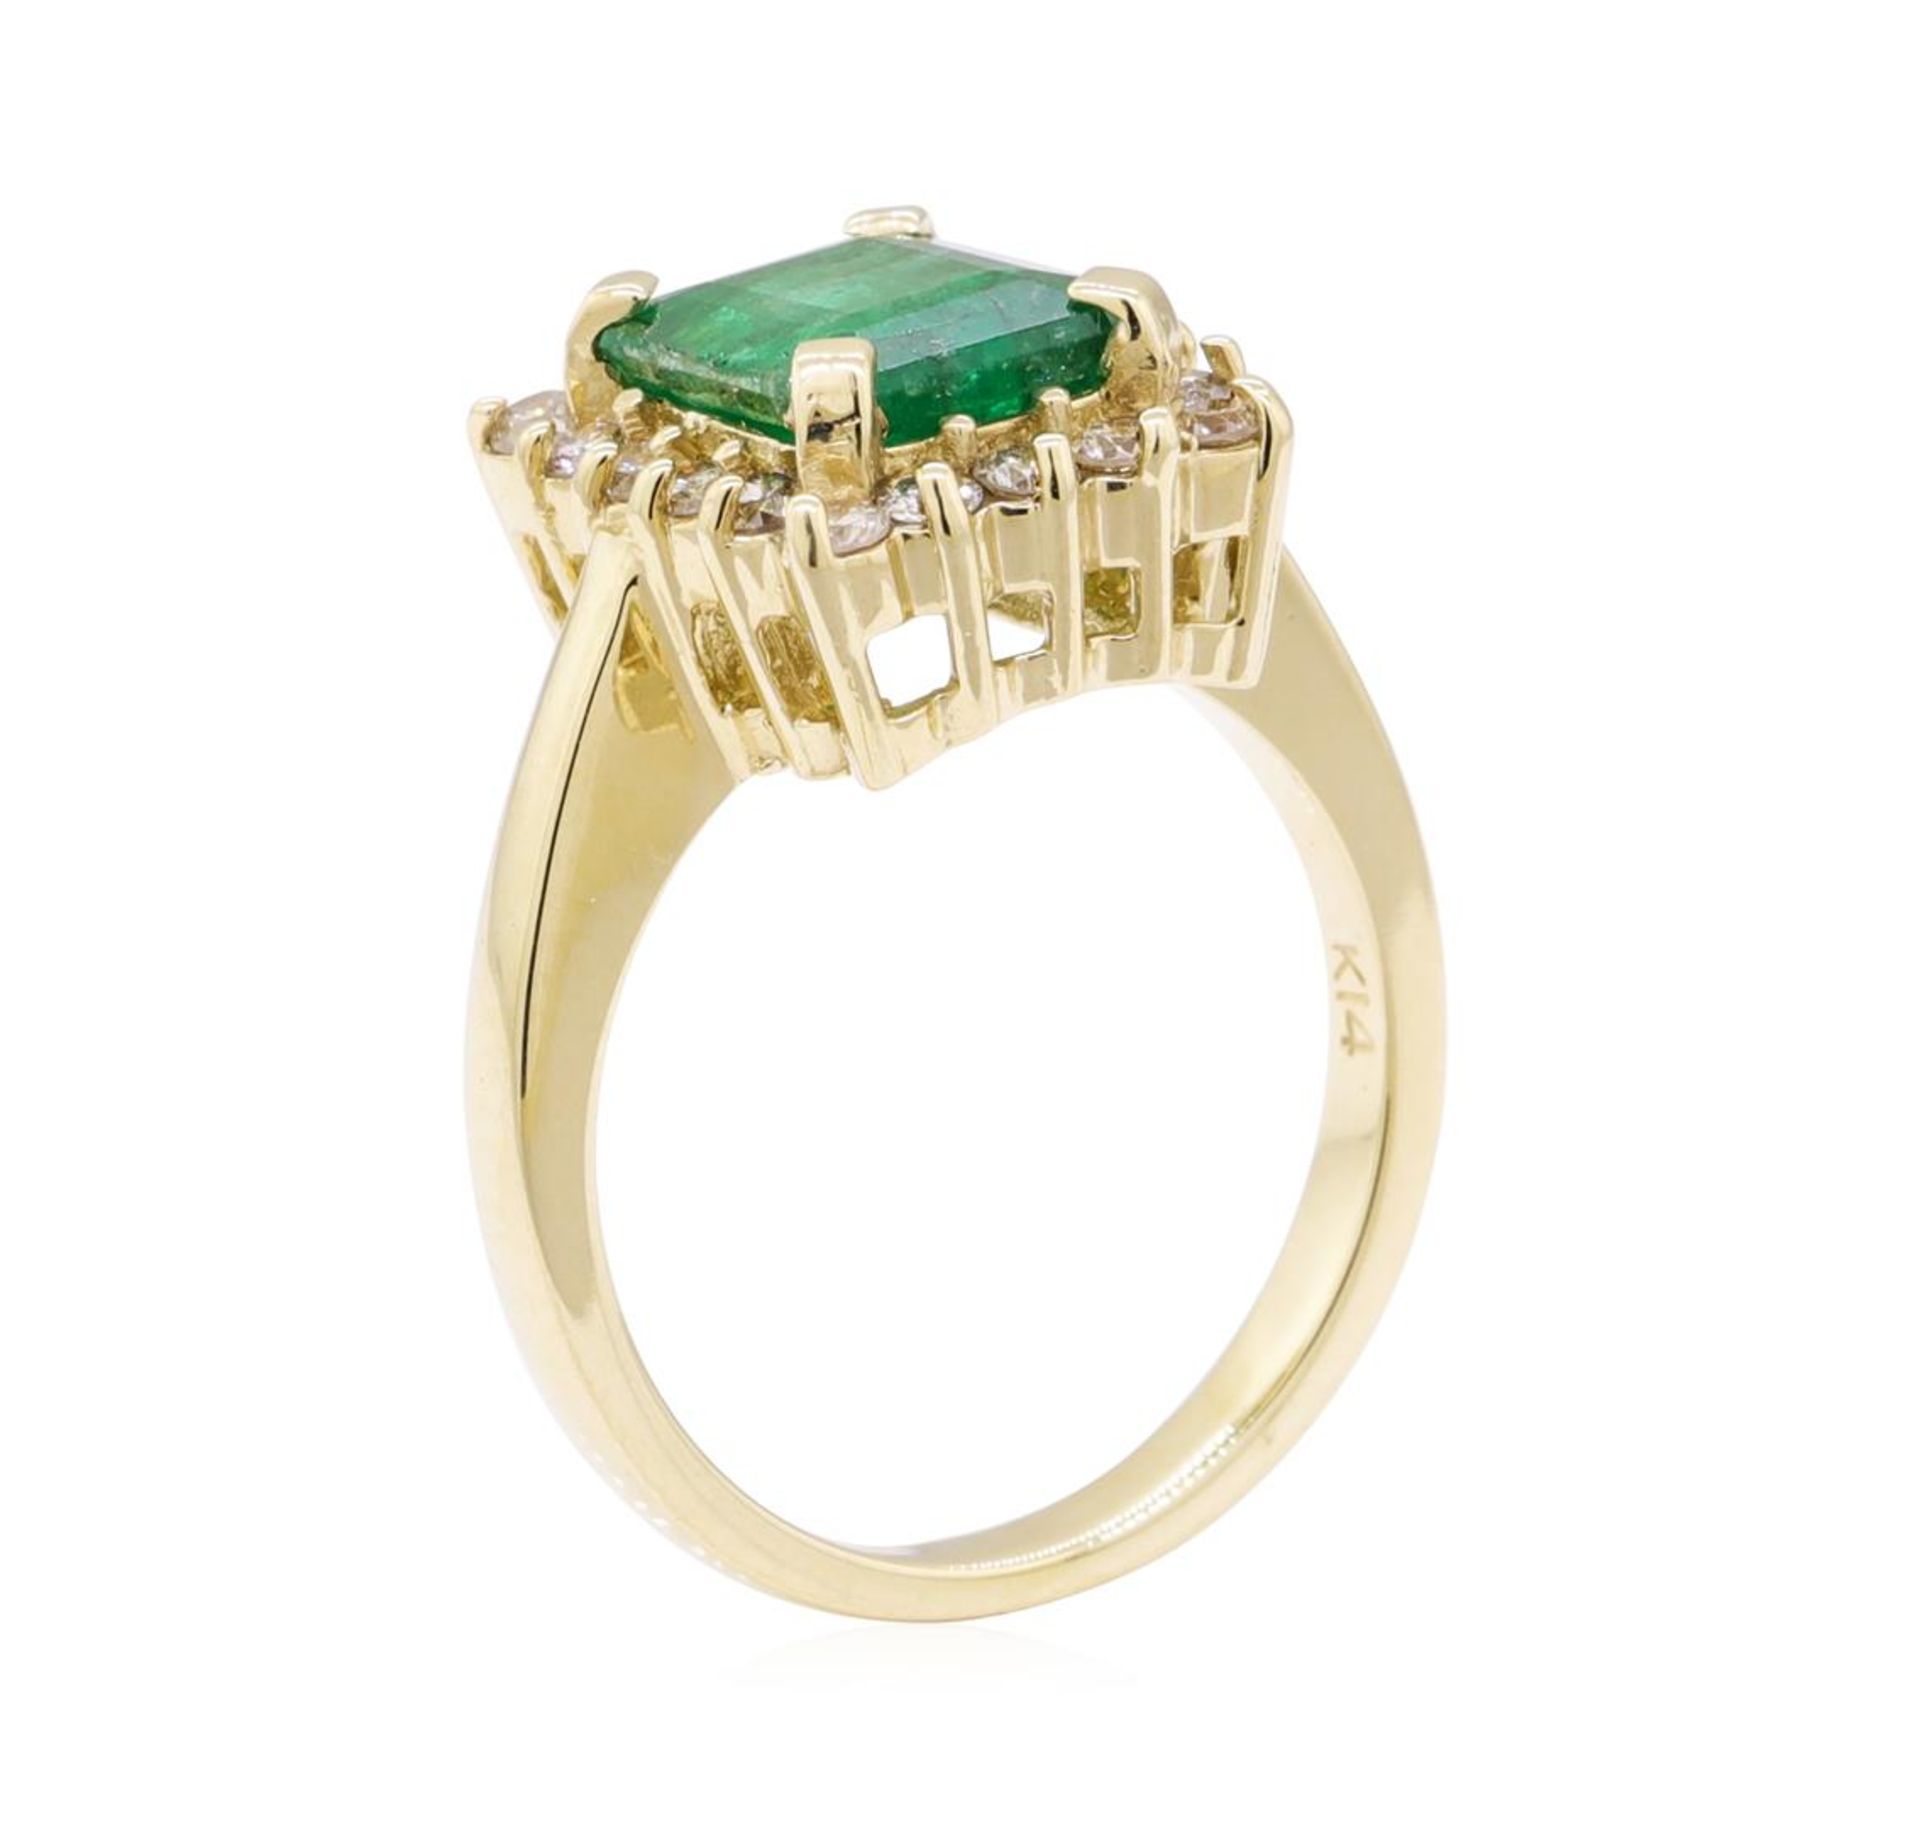 2.90 ctw Emerald and Diamond Ring - 14KT Yellow Gold - Image 4 of 5